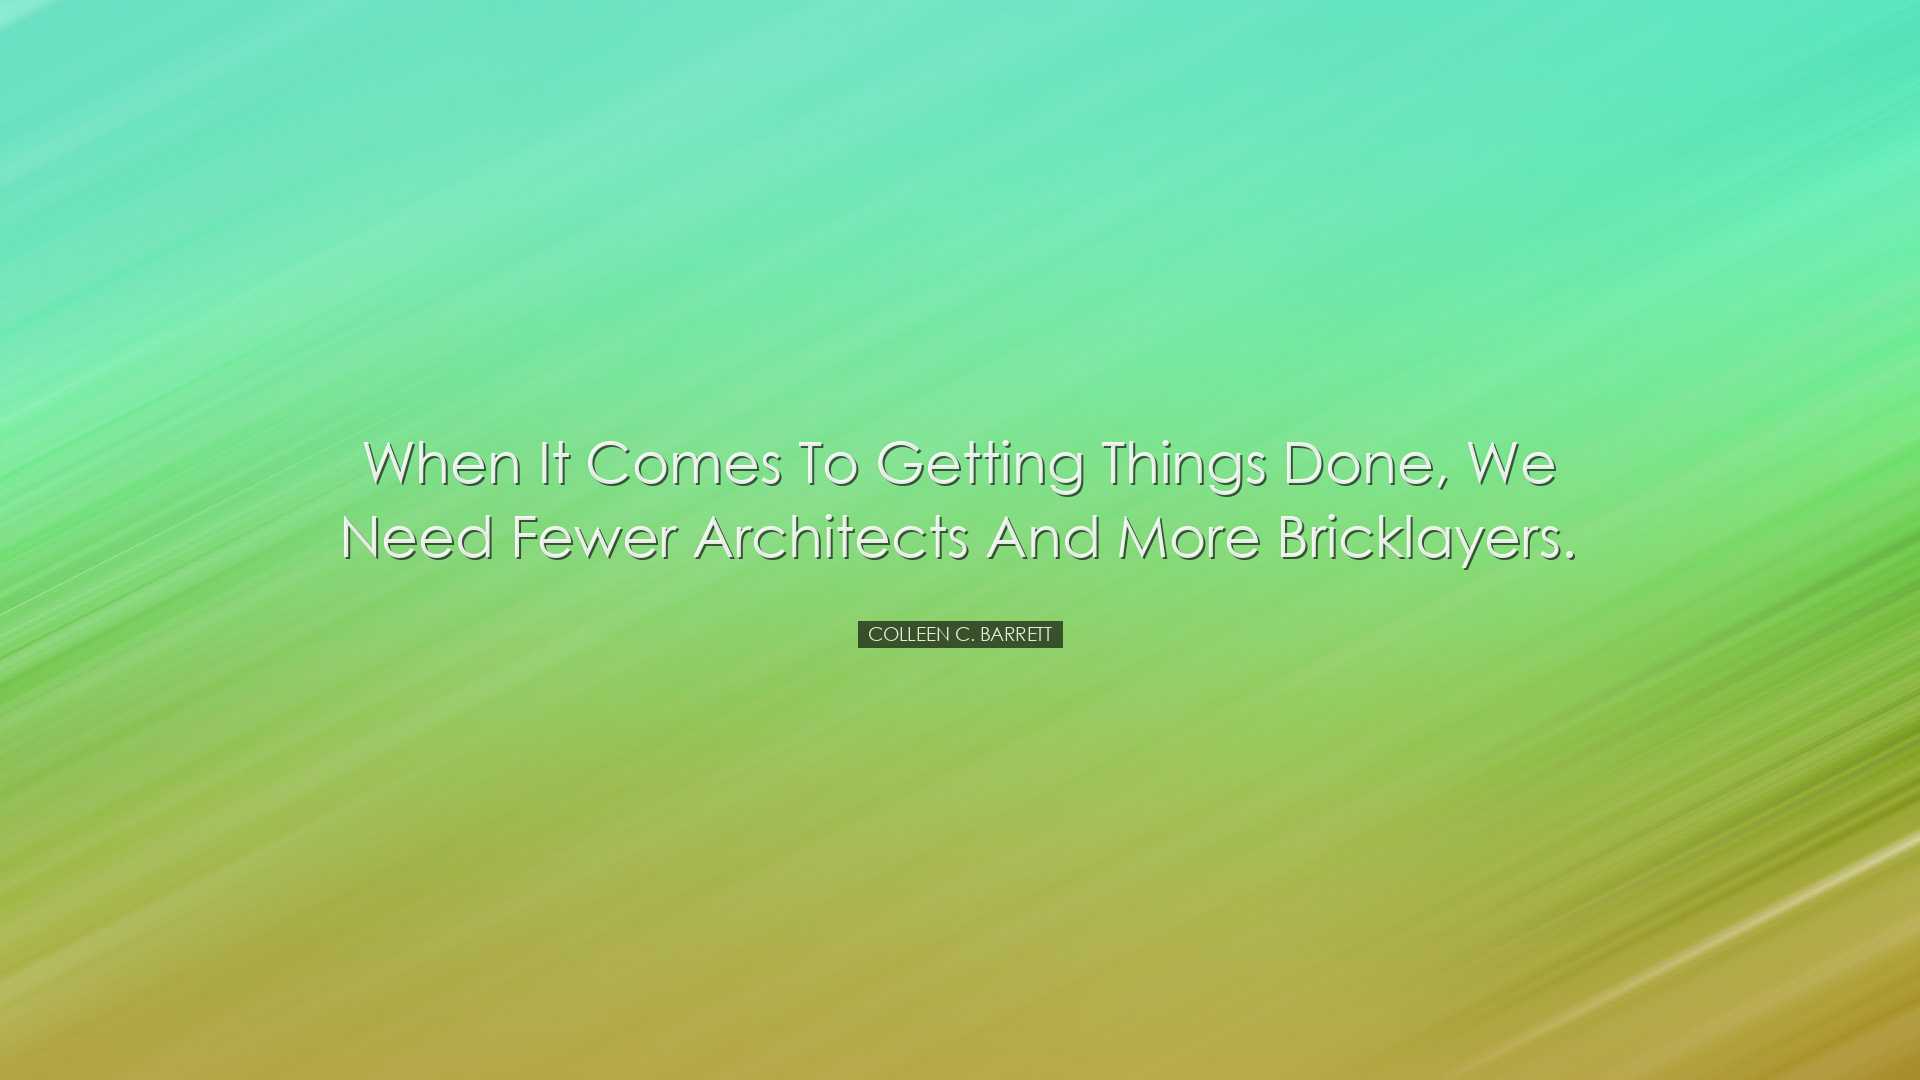 When it comes to getting things done, we need fewer architects and